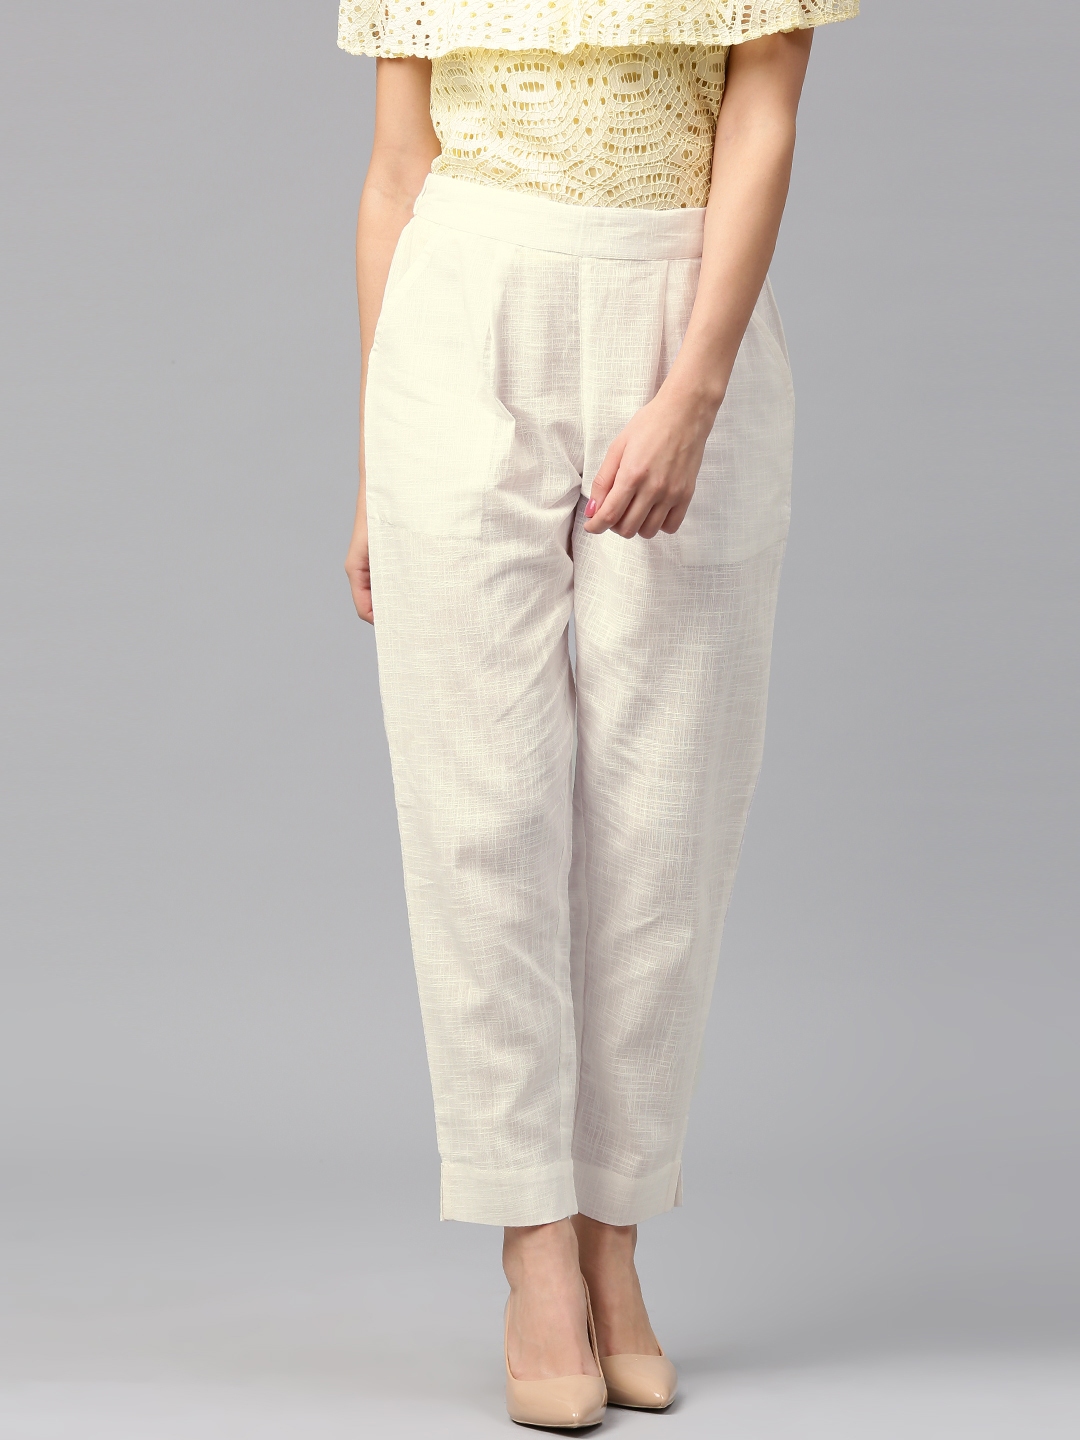 Aggregate 84+ white trouser pants super hot - in.cdgdbentre